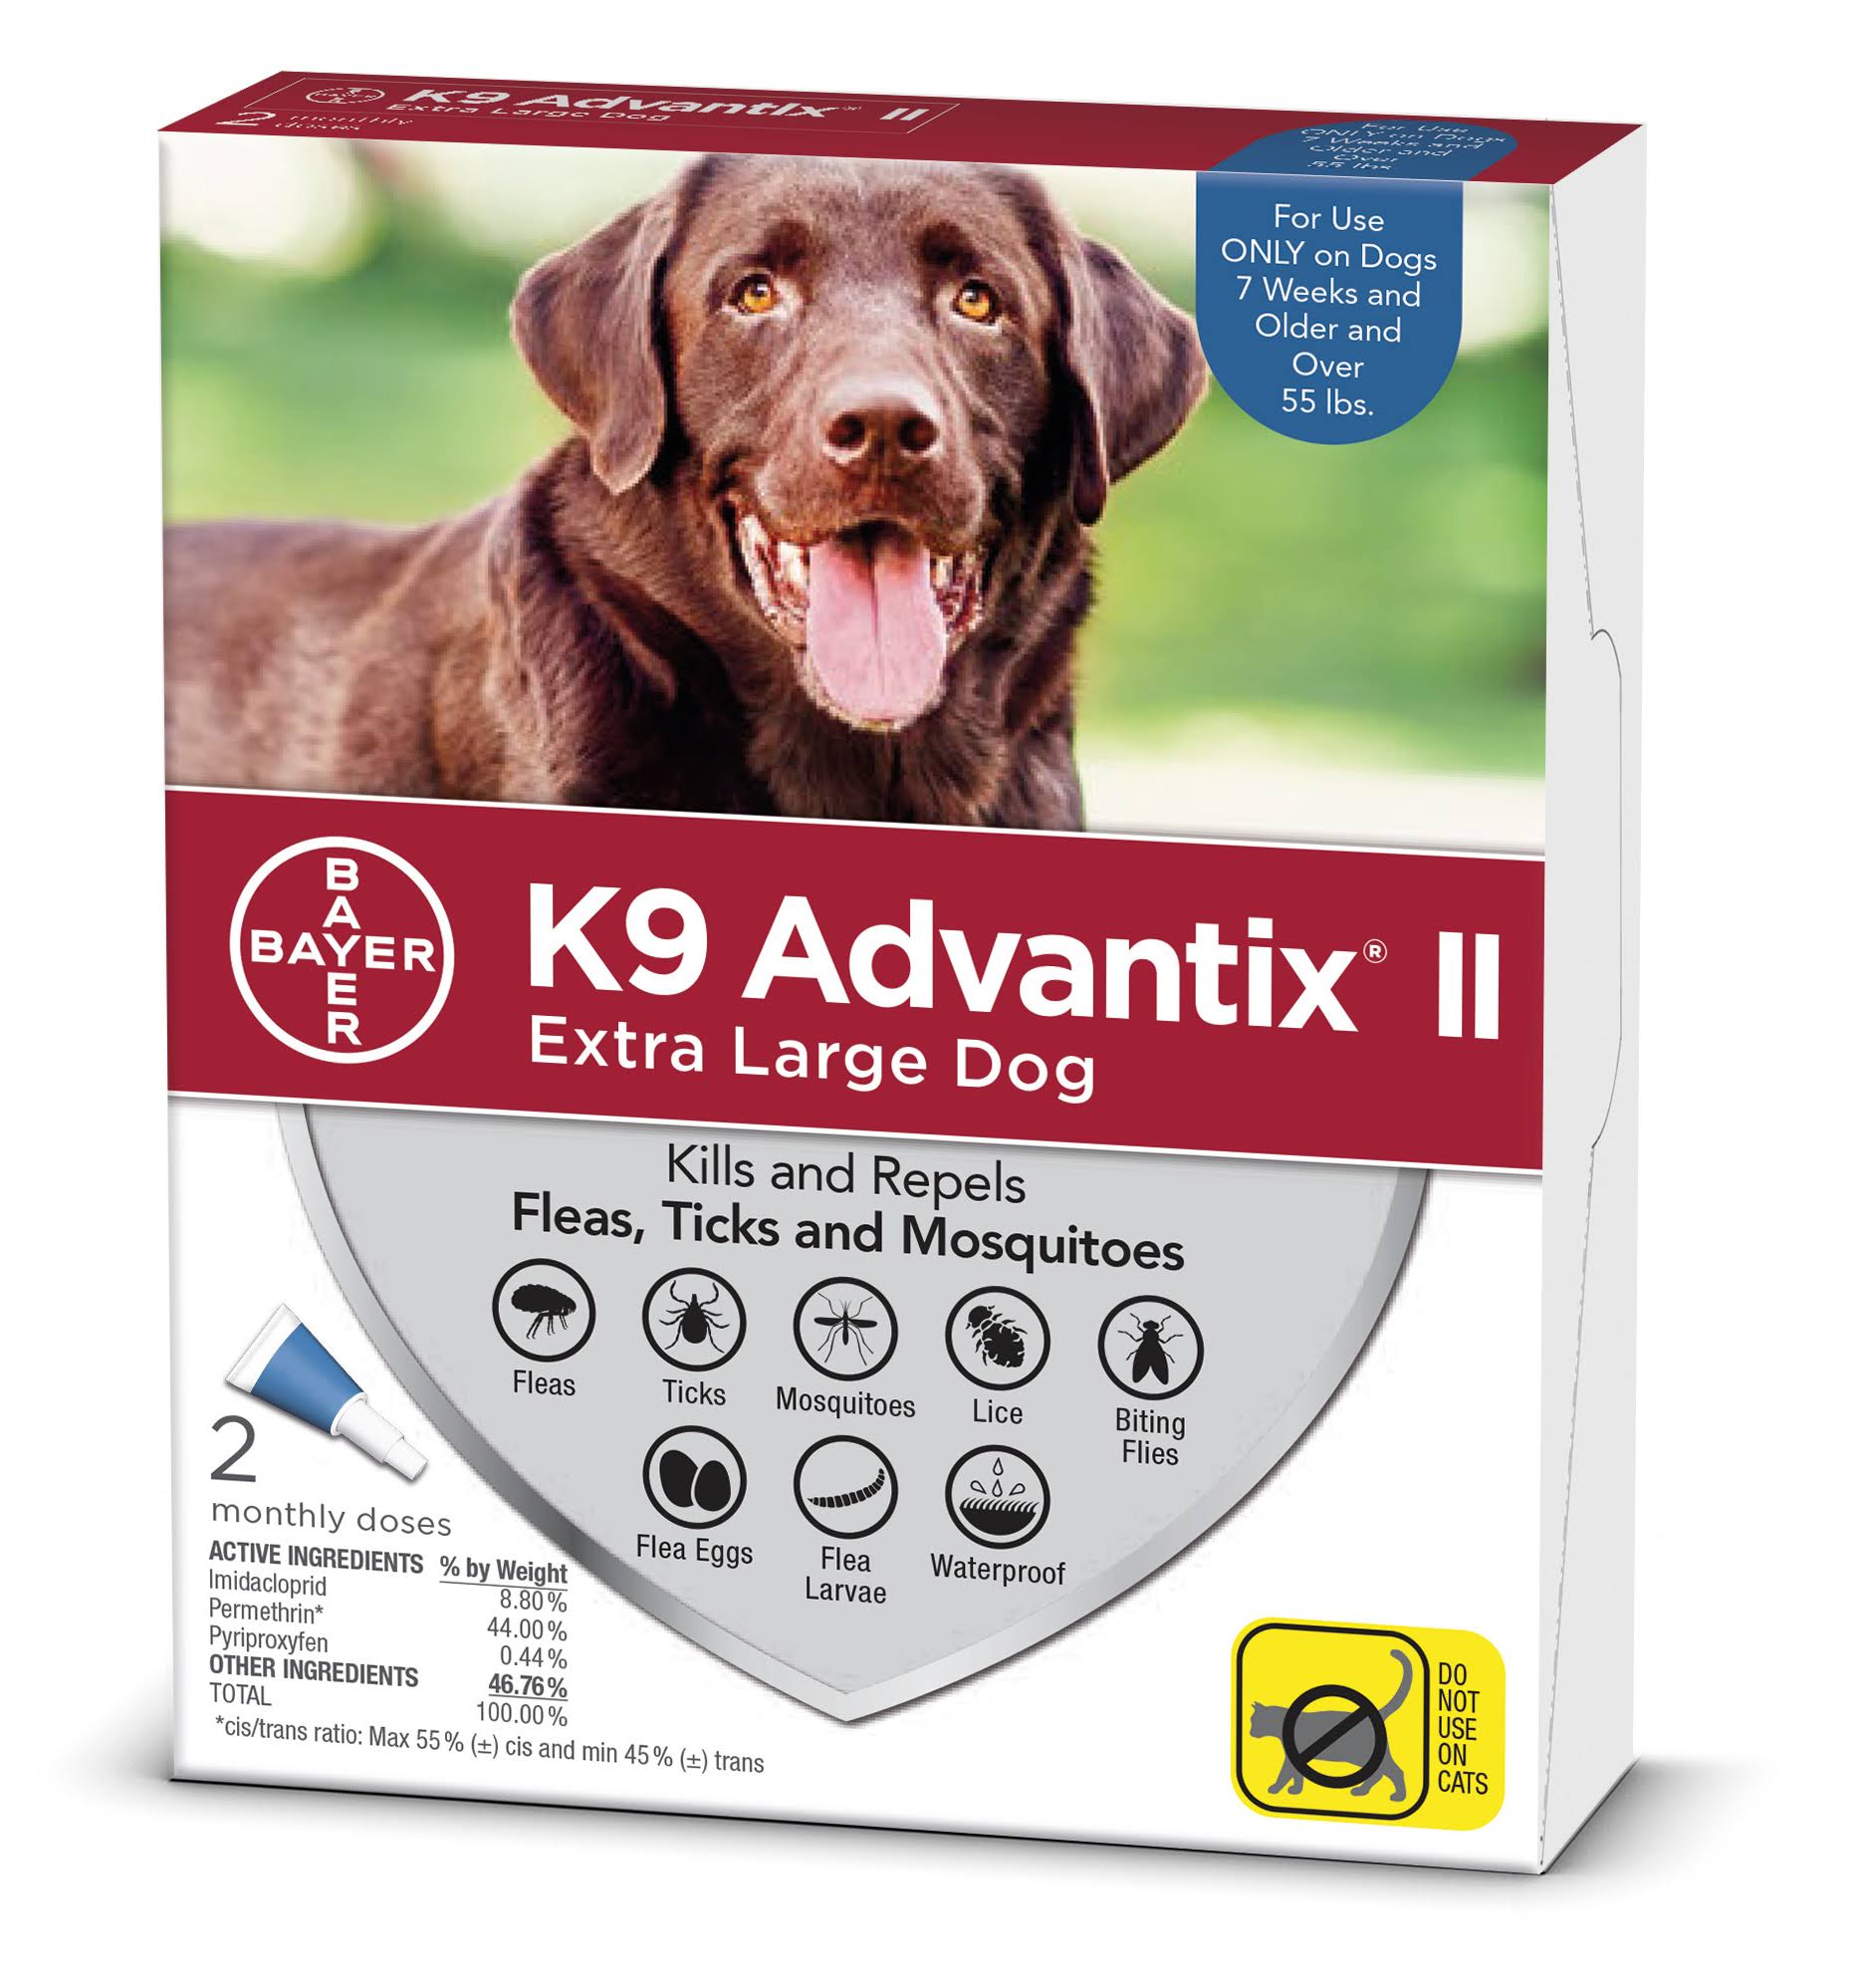 Bayer Healthcare K9 Advantix ll X-Large Dog Flea and Tick Prevention and Treatment - Over 55lb